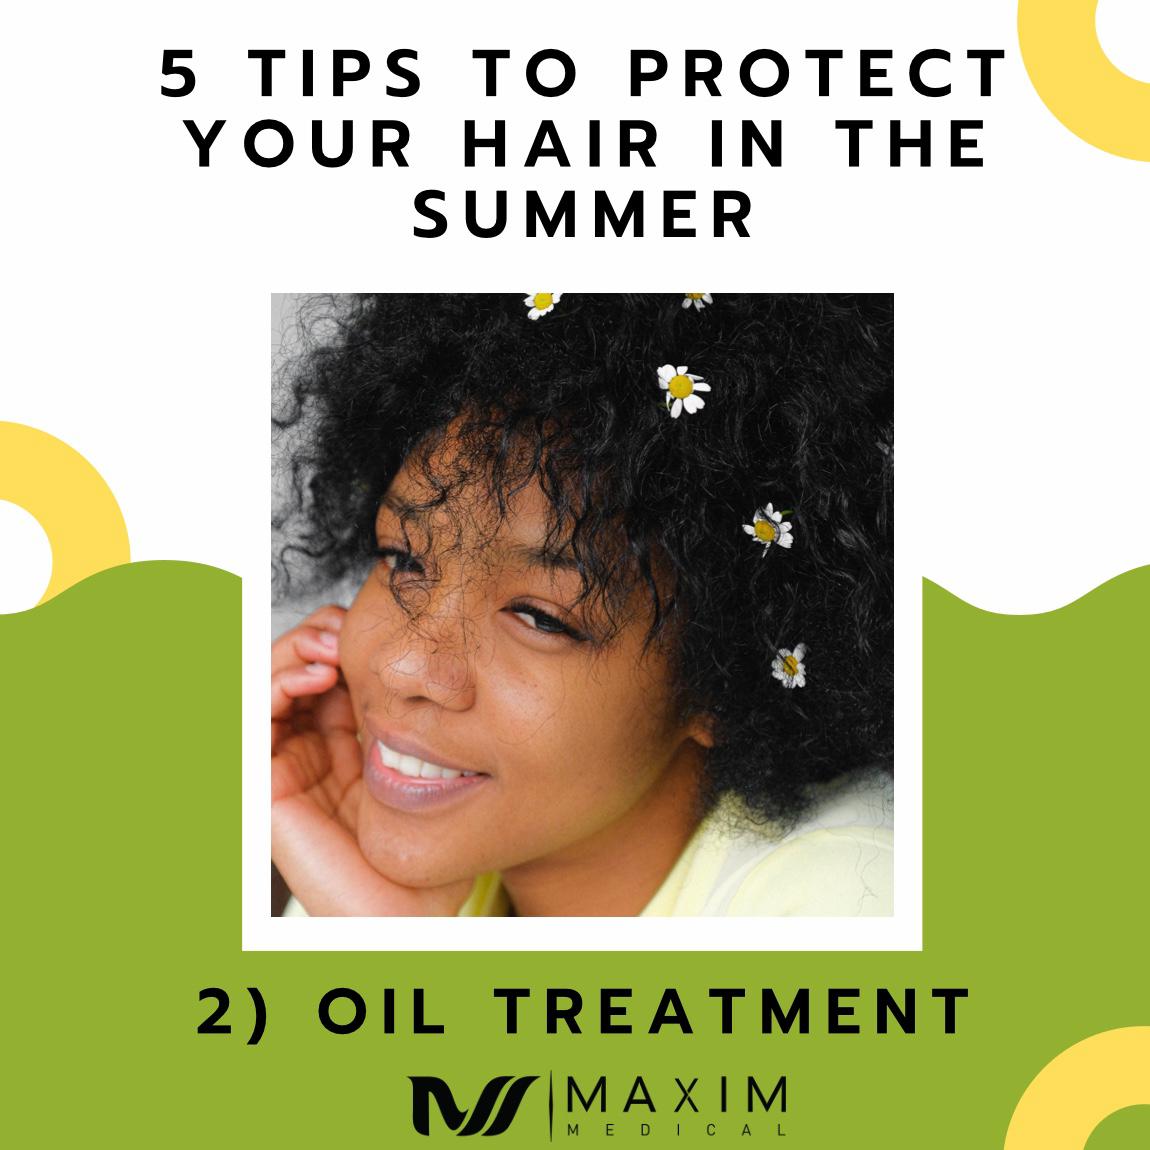 5 Tips To Protect Your Hair In The Summer

1. Oil Treatment
Though it may sound like it, oil treatments don’t have to be anything fancy or complicated. It can be as simple as applying a mix of olive oil or coconut oil or sesame oil with Vitamin E oil and massaging it into your scalp. The purpose of this tip is to mitigate how much oil and moisture your scalp/hair can lose during those hot summer days. This can prevent one from getting an irritated scalp or dry, coarse hair. This will also promote healthy blood flow to your hair follicles through the massaging of the scalp.

Full article on our website: